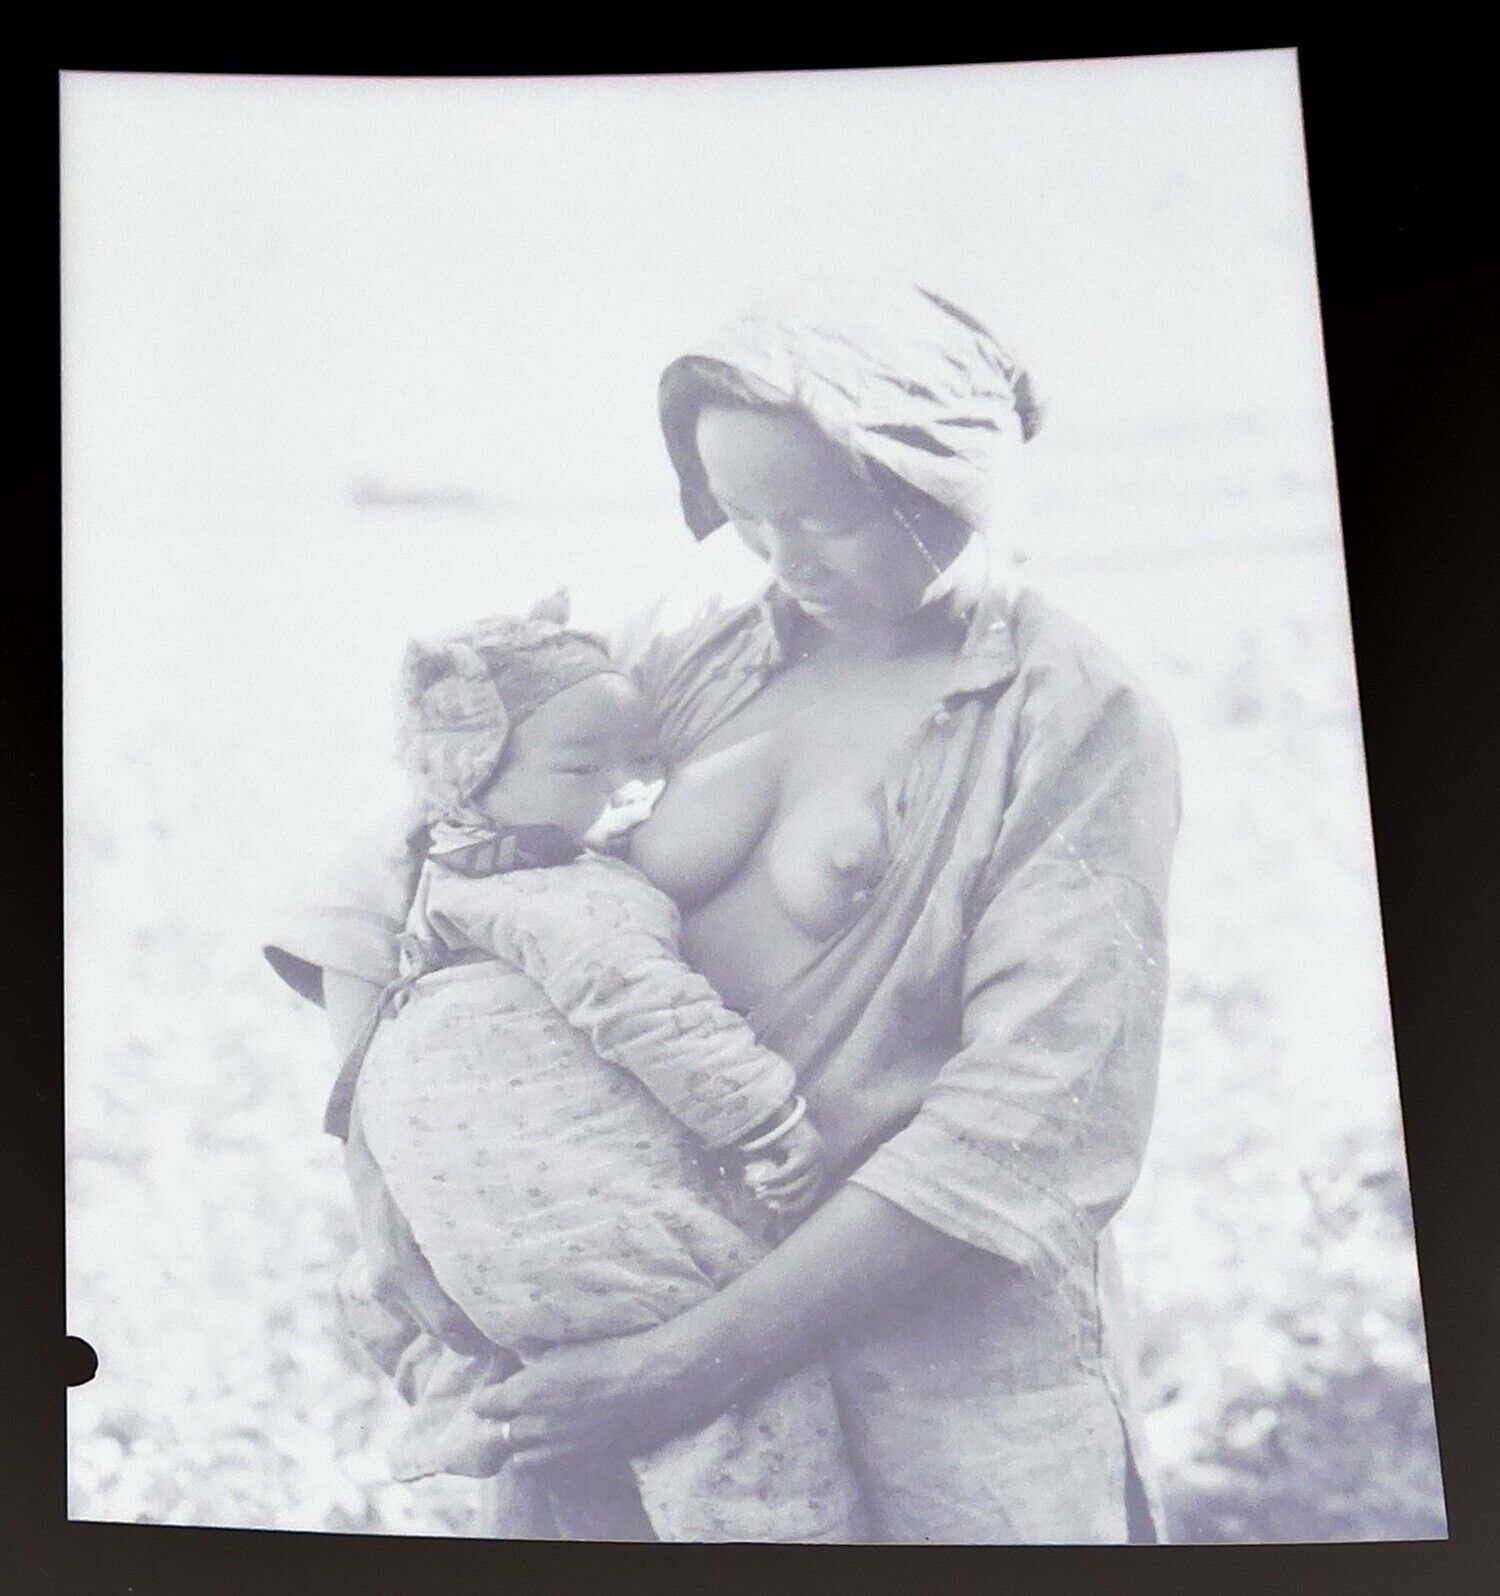 1944 CHINA, MOTHER BREASTFEEDING BABY FROM NEG REPRINT ONLY (8x10 reprint)